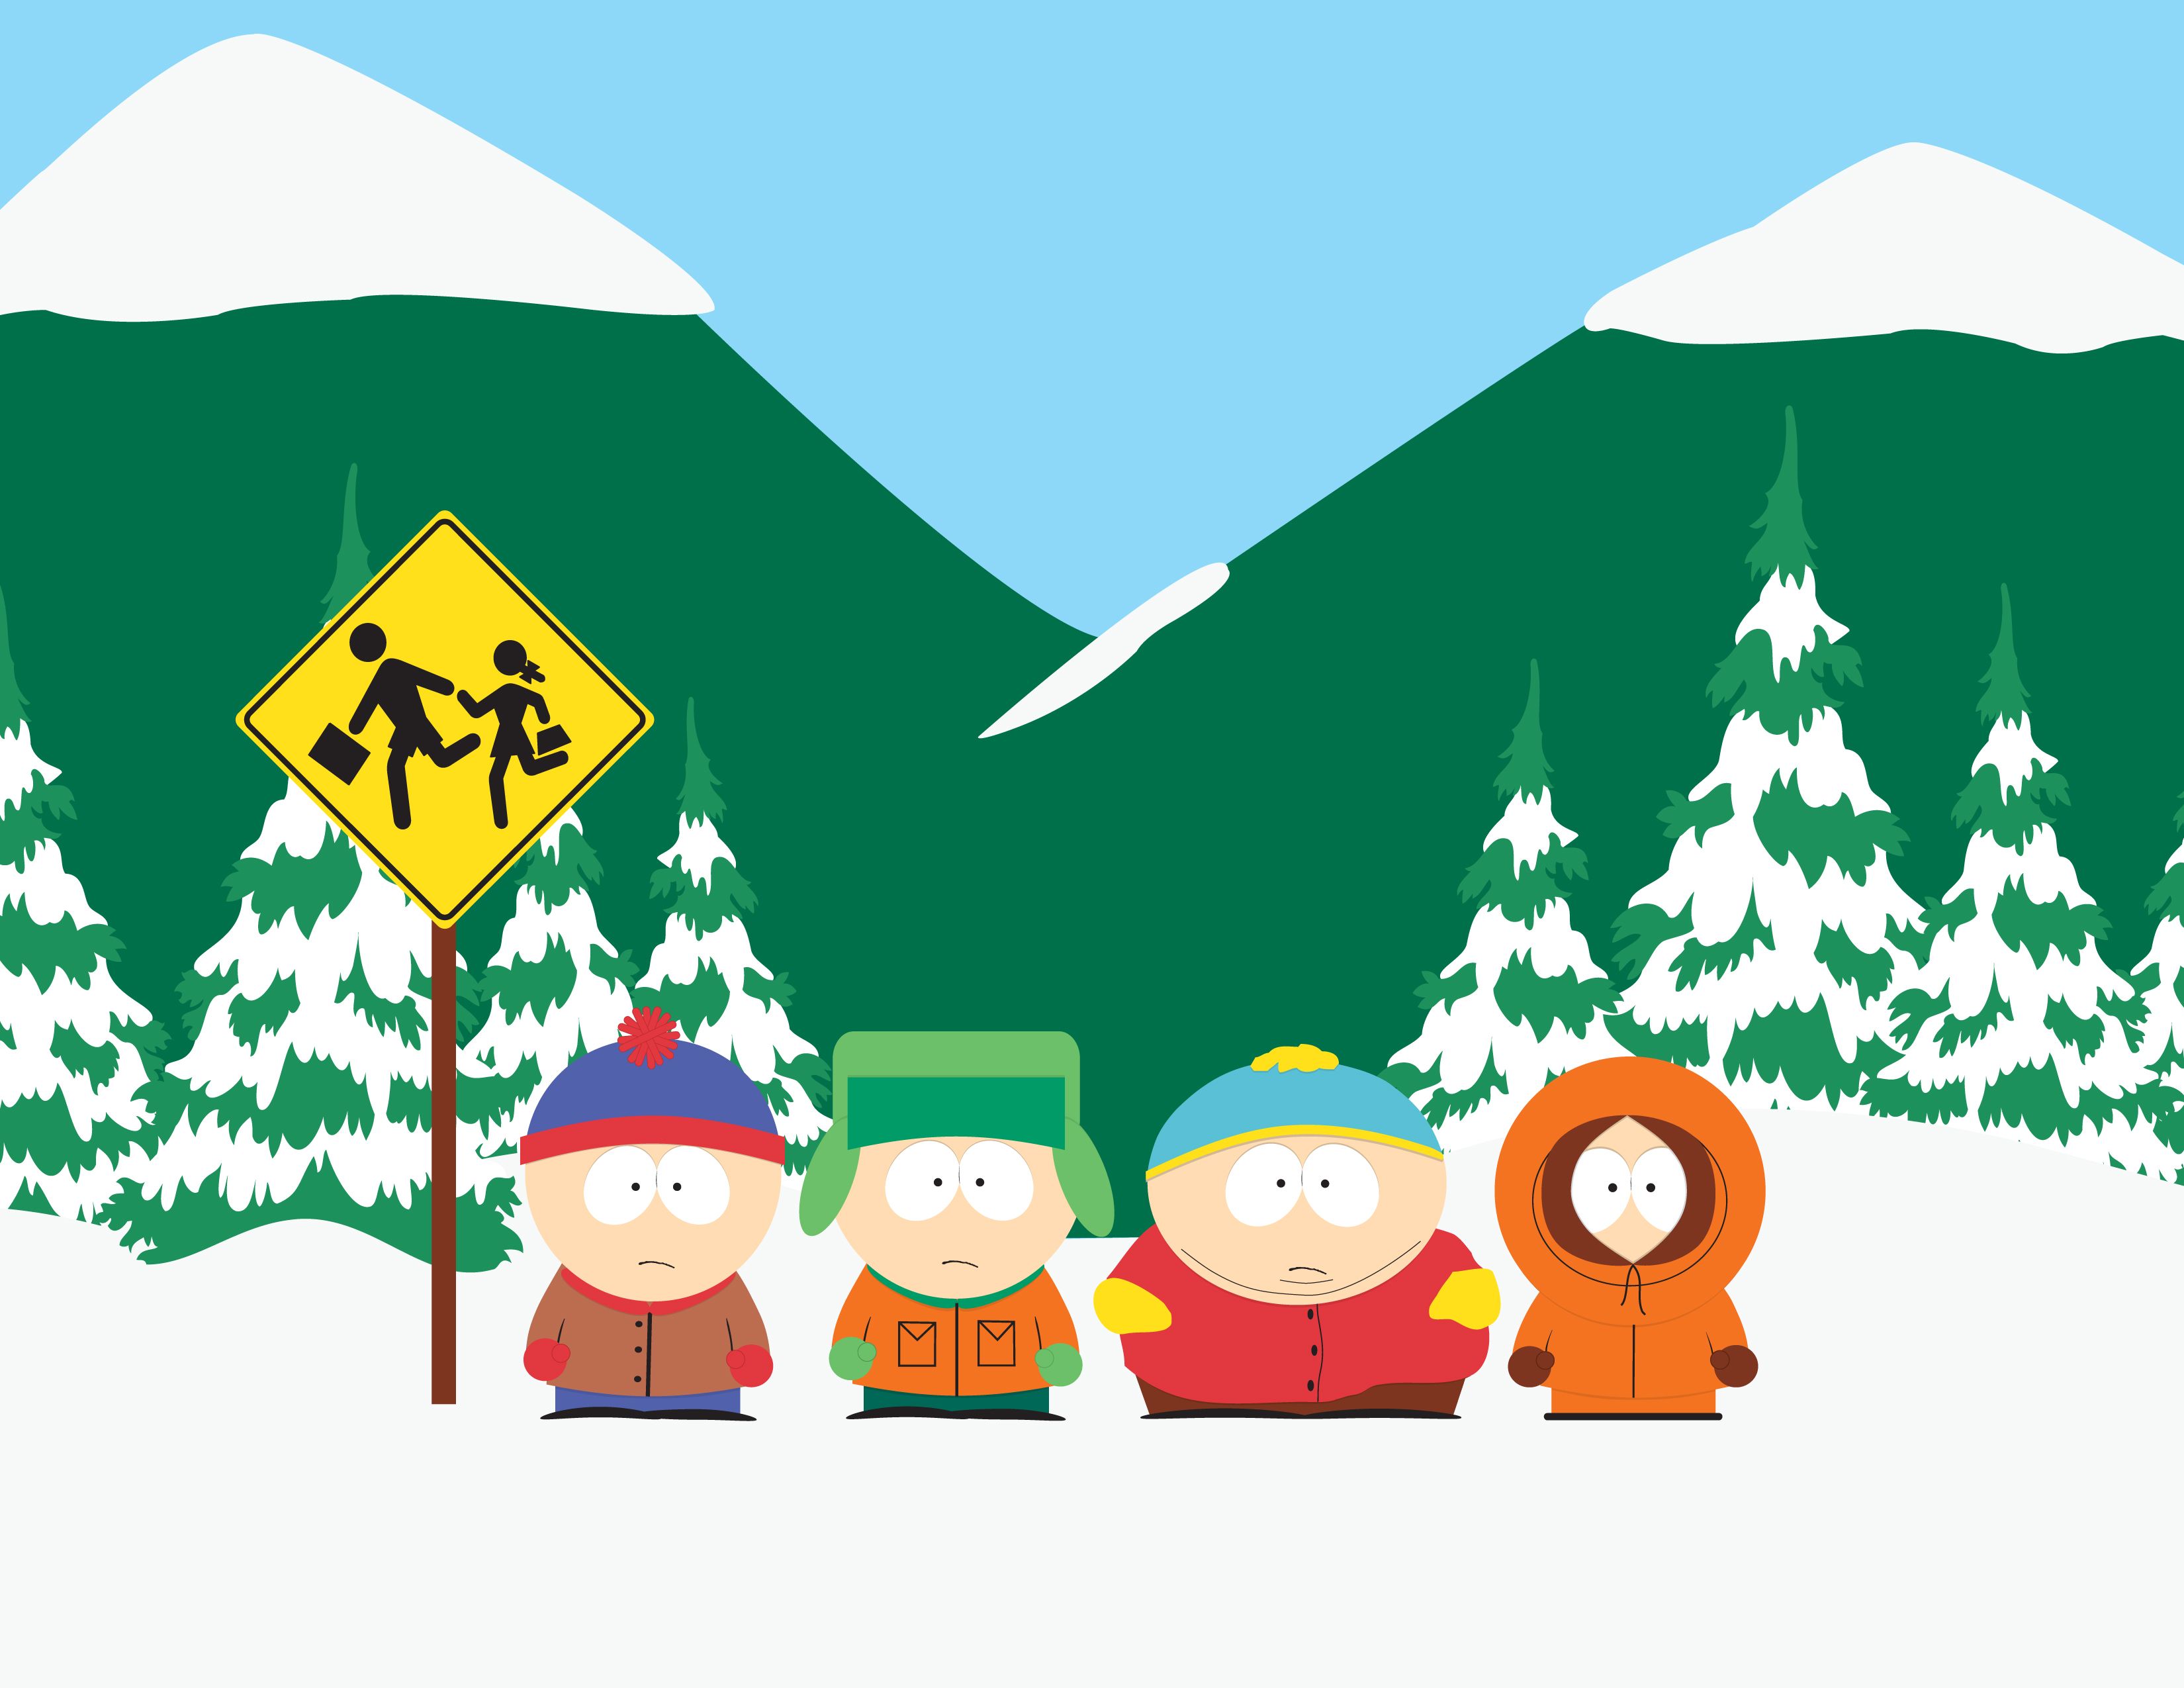 South Park: Stan, Kyle Cartman and Kenny wait at the bus stop